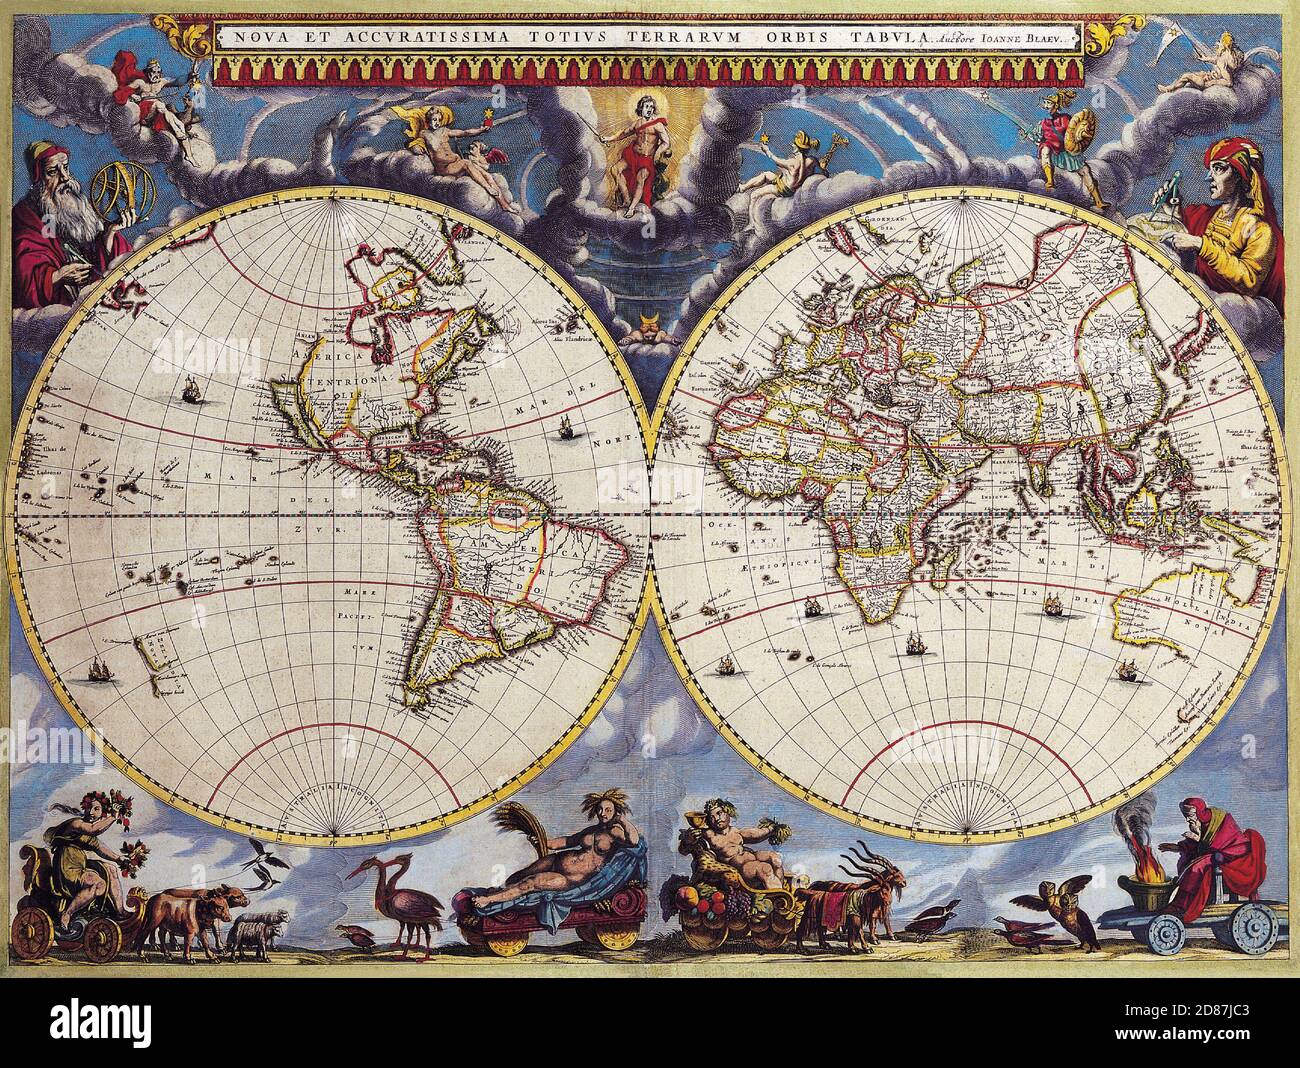 Illustrated old map of the World, vintage style full of details. Two hemispheres. Angels and persons surrounding. Stock Photo